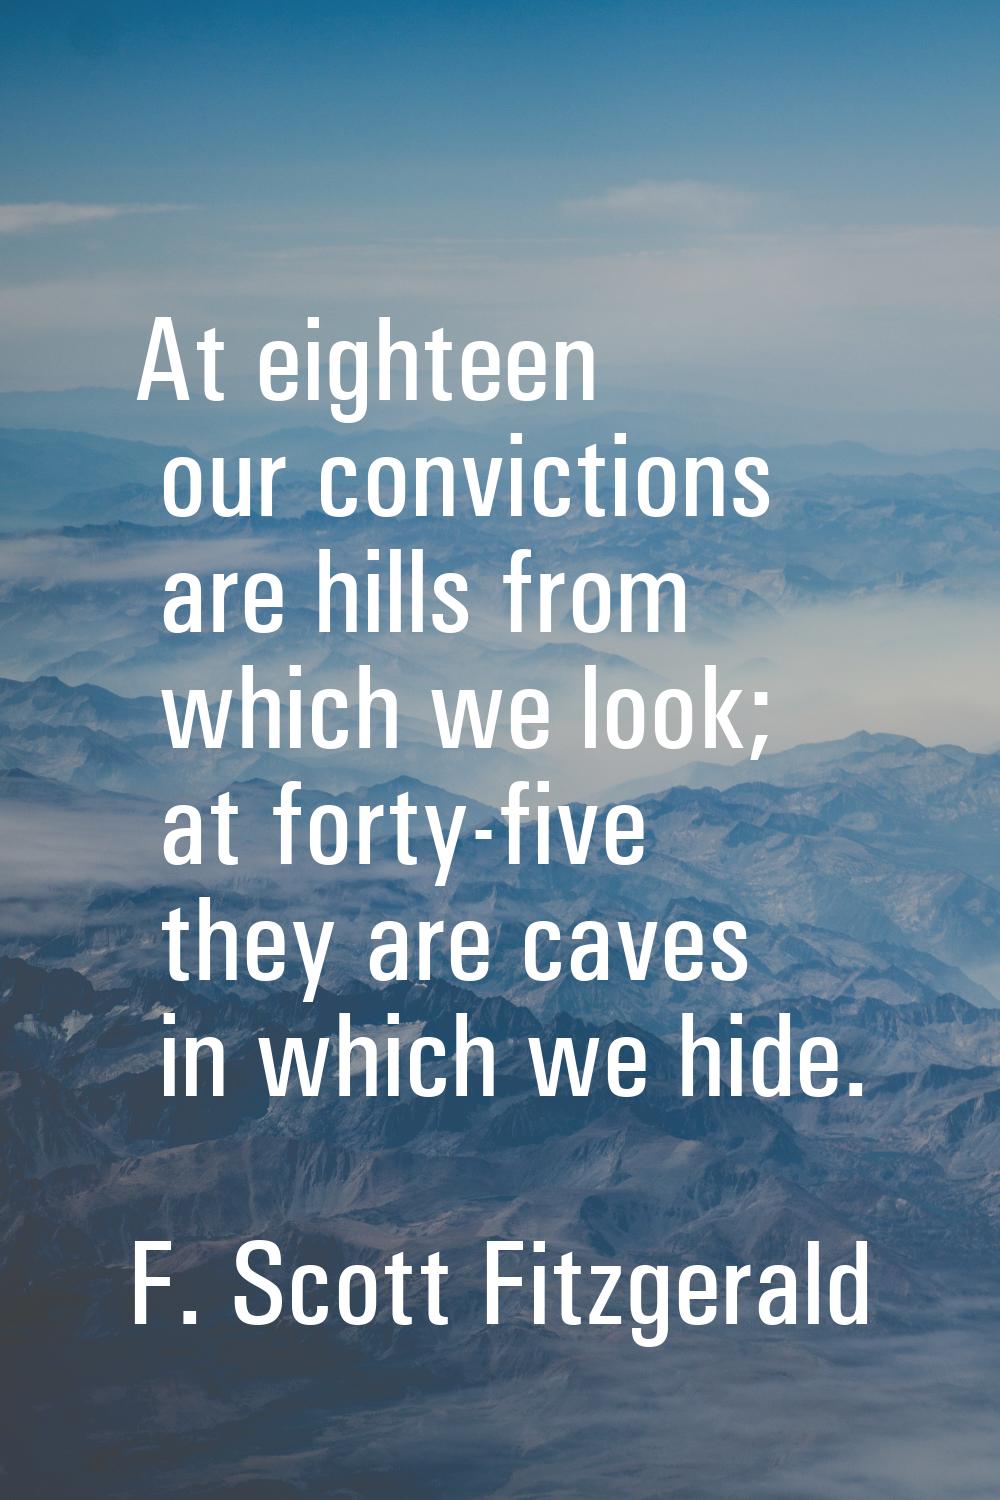 At eighteen our convictions are hills from which we look; at forty-five they are caves in which we 